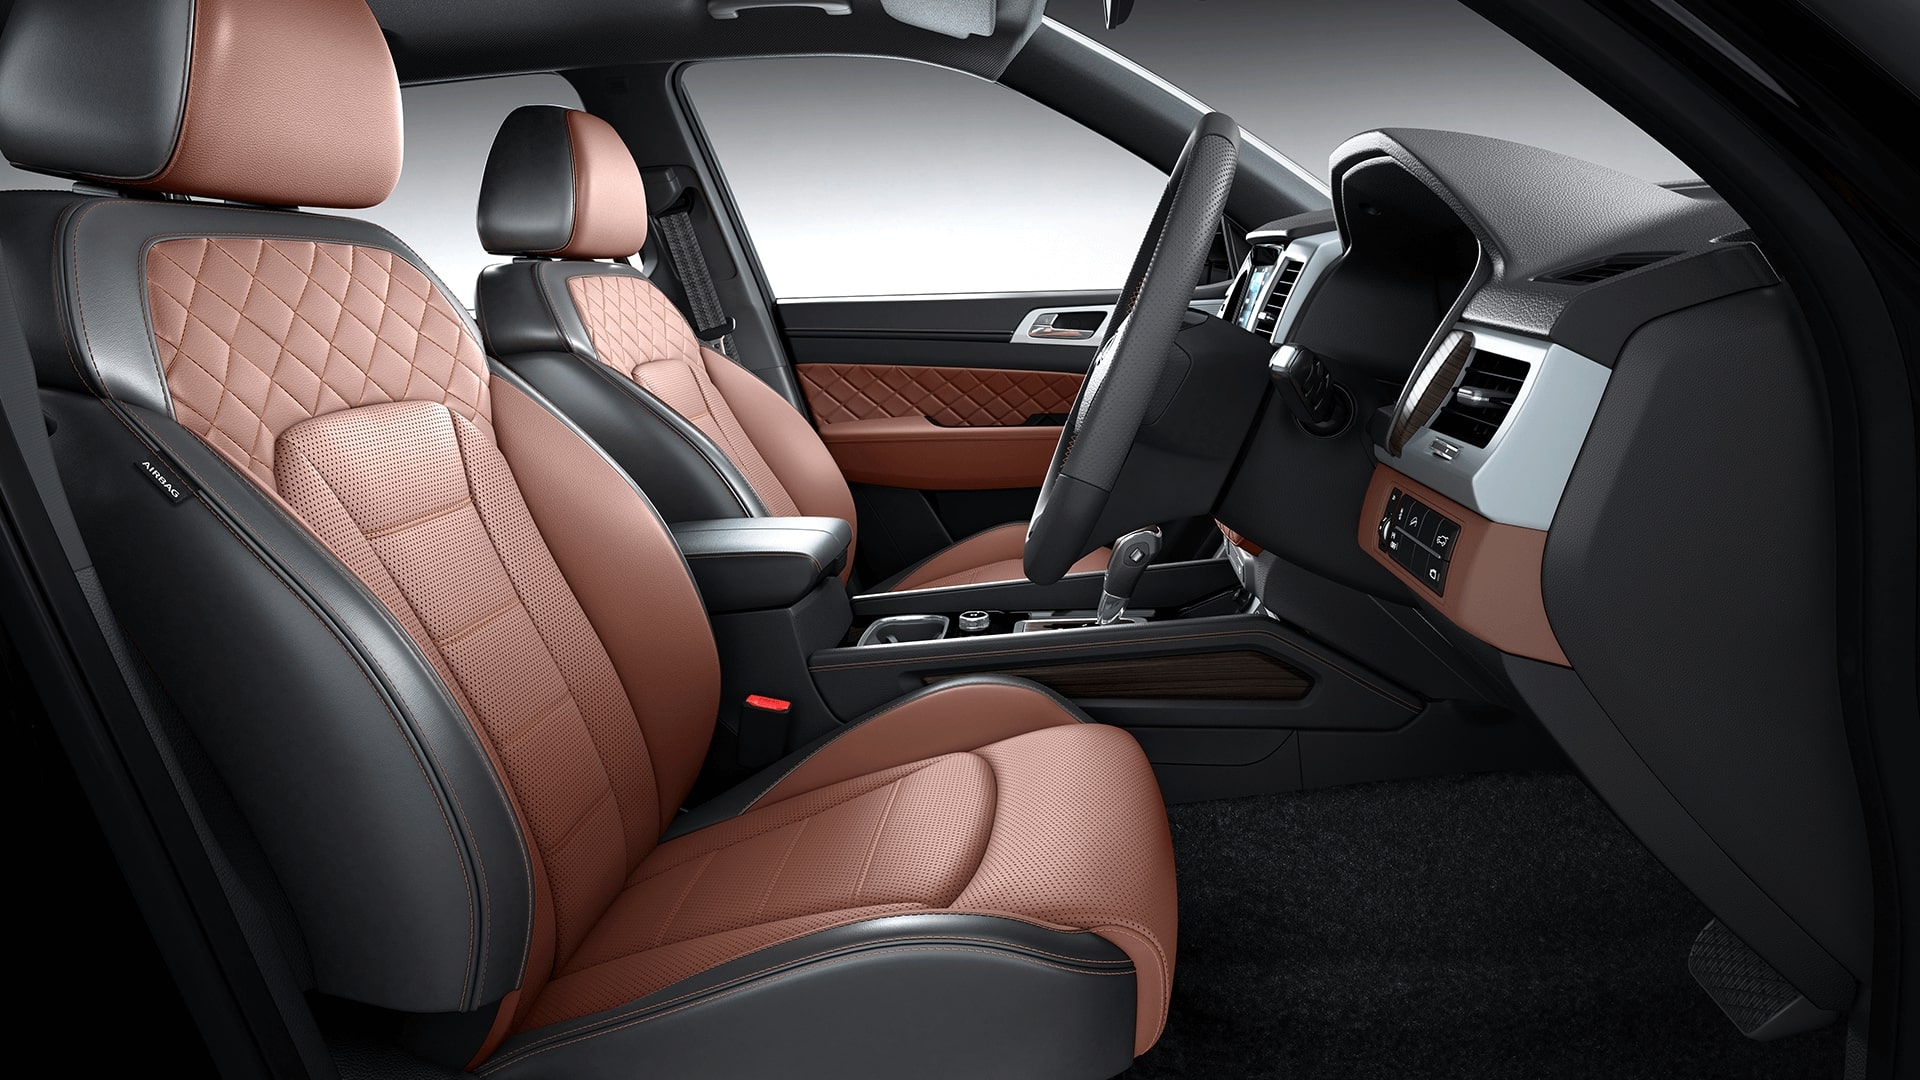 Interior With Leather Seat - Mahindra Alturas Interior , HD Wallpaper & Backgrounds